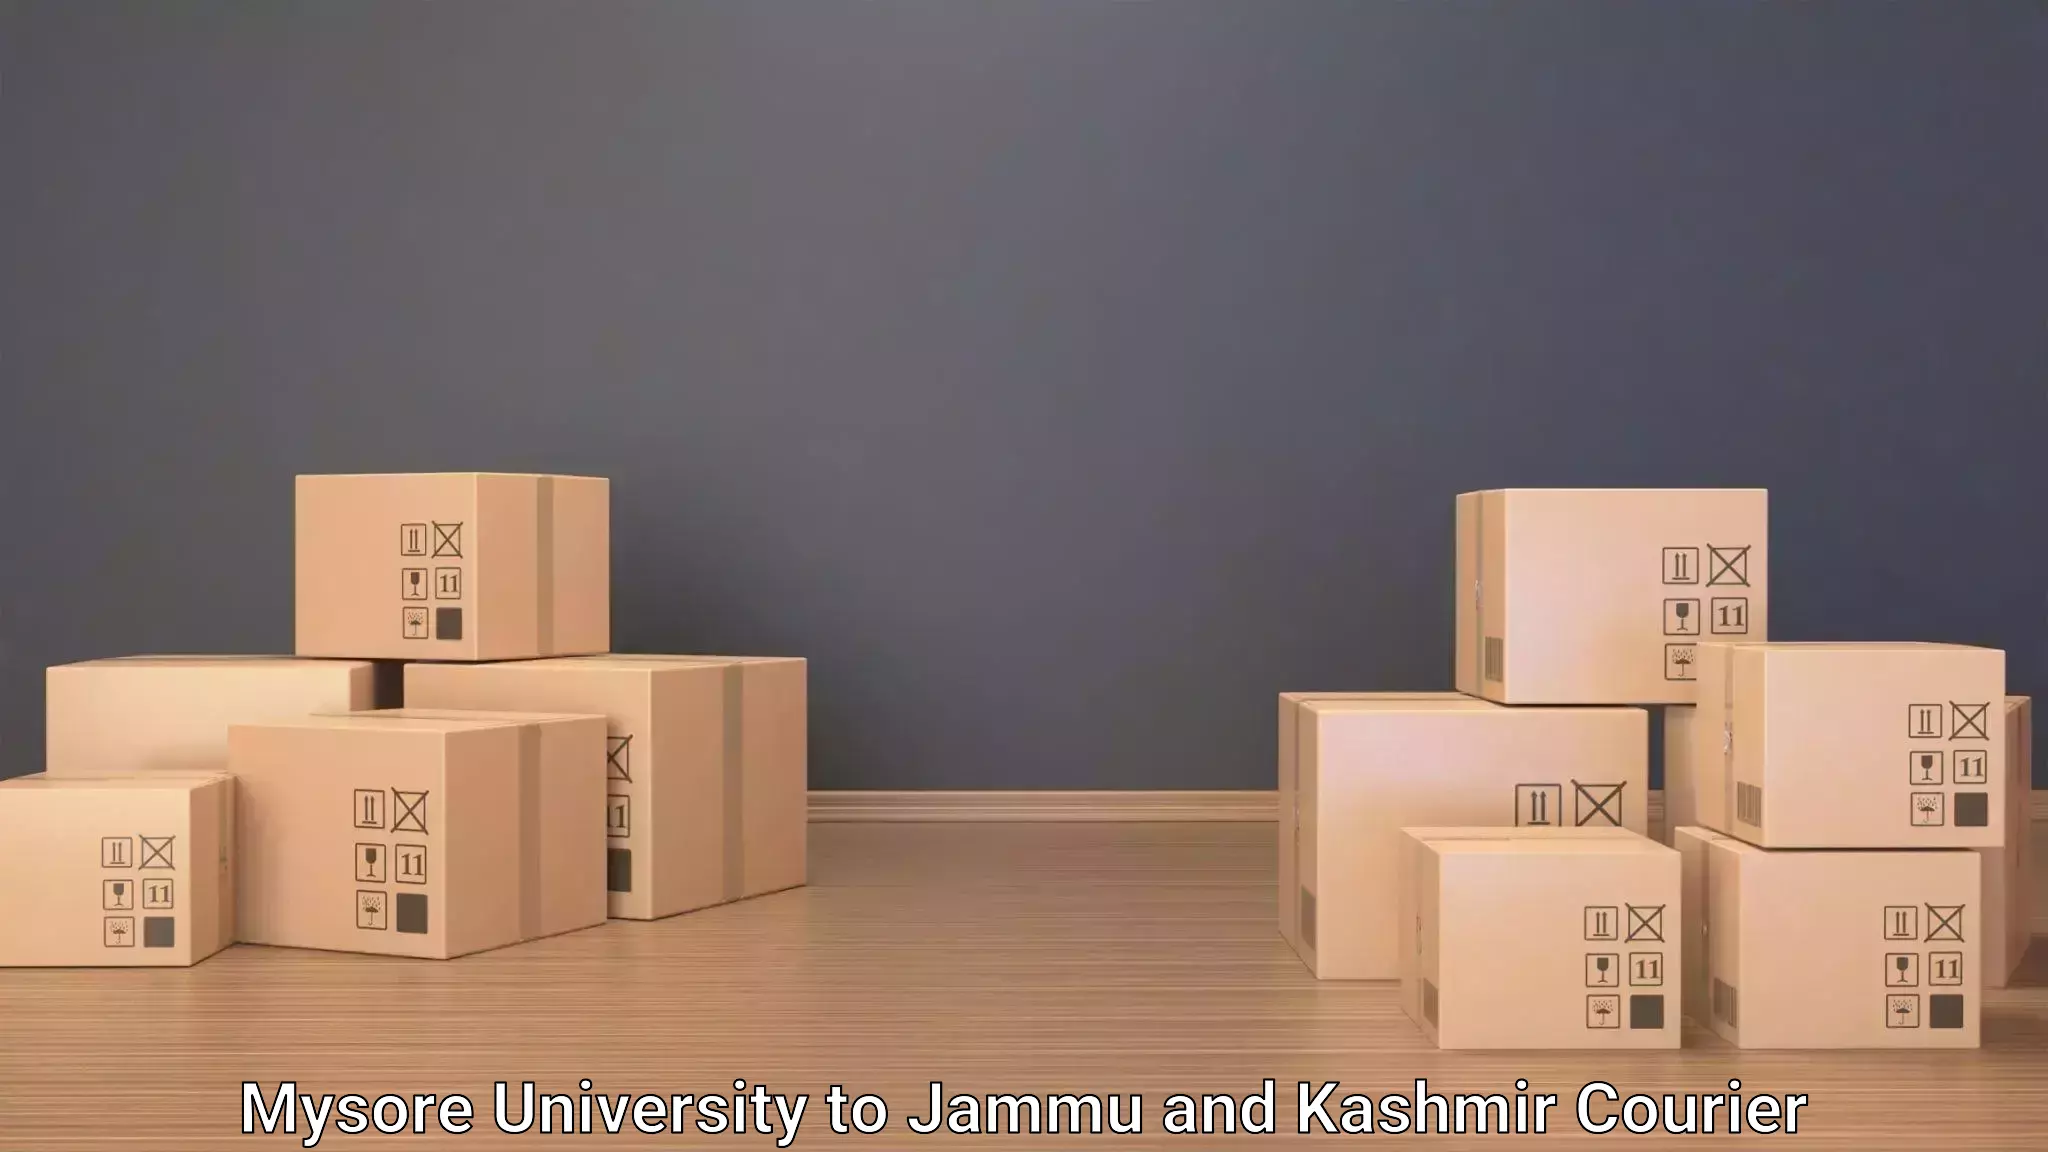 Luggage storage and delivery in Mysore University to Baramulla